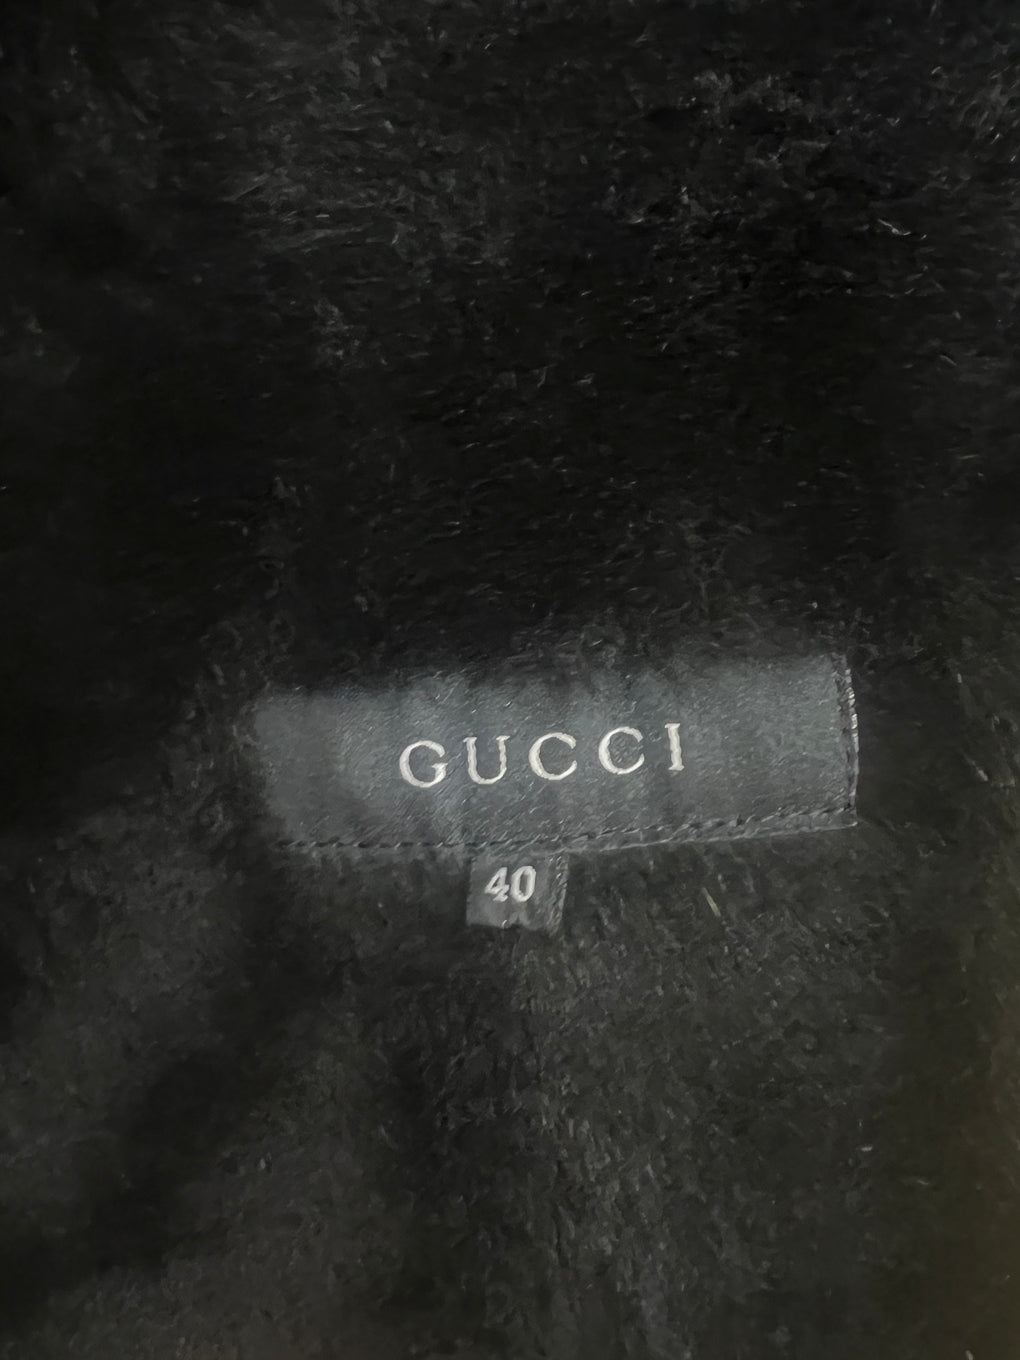 TOM FORD FOR GUCCI FUR COAT